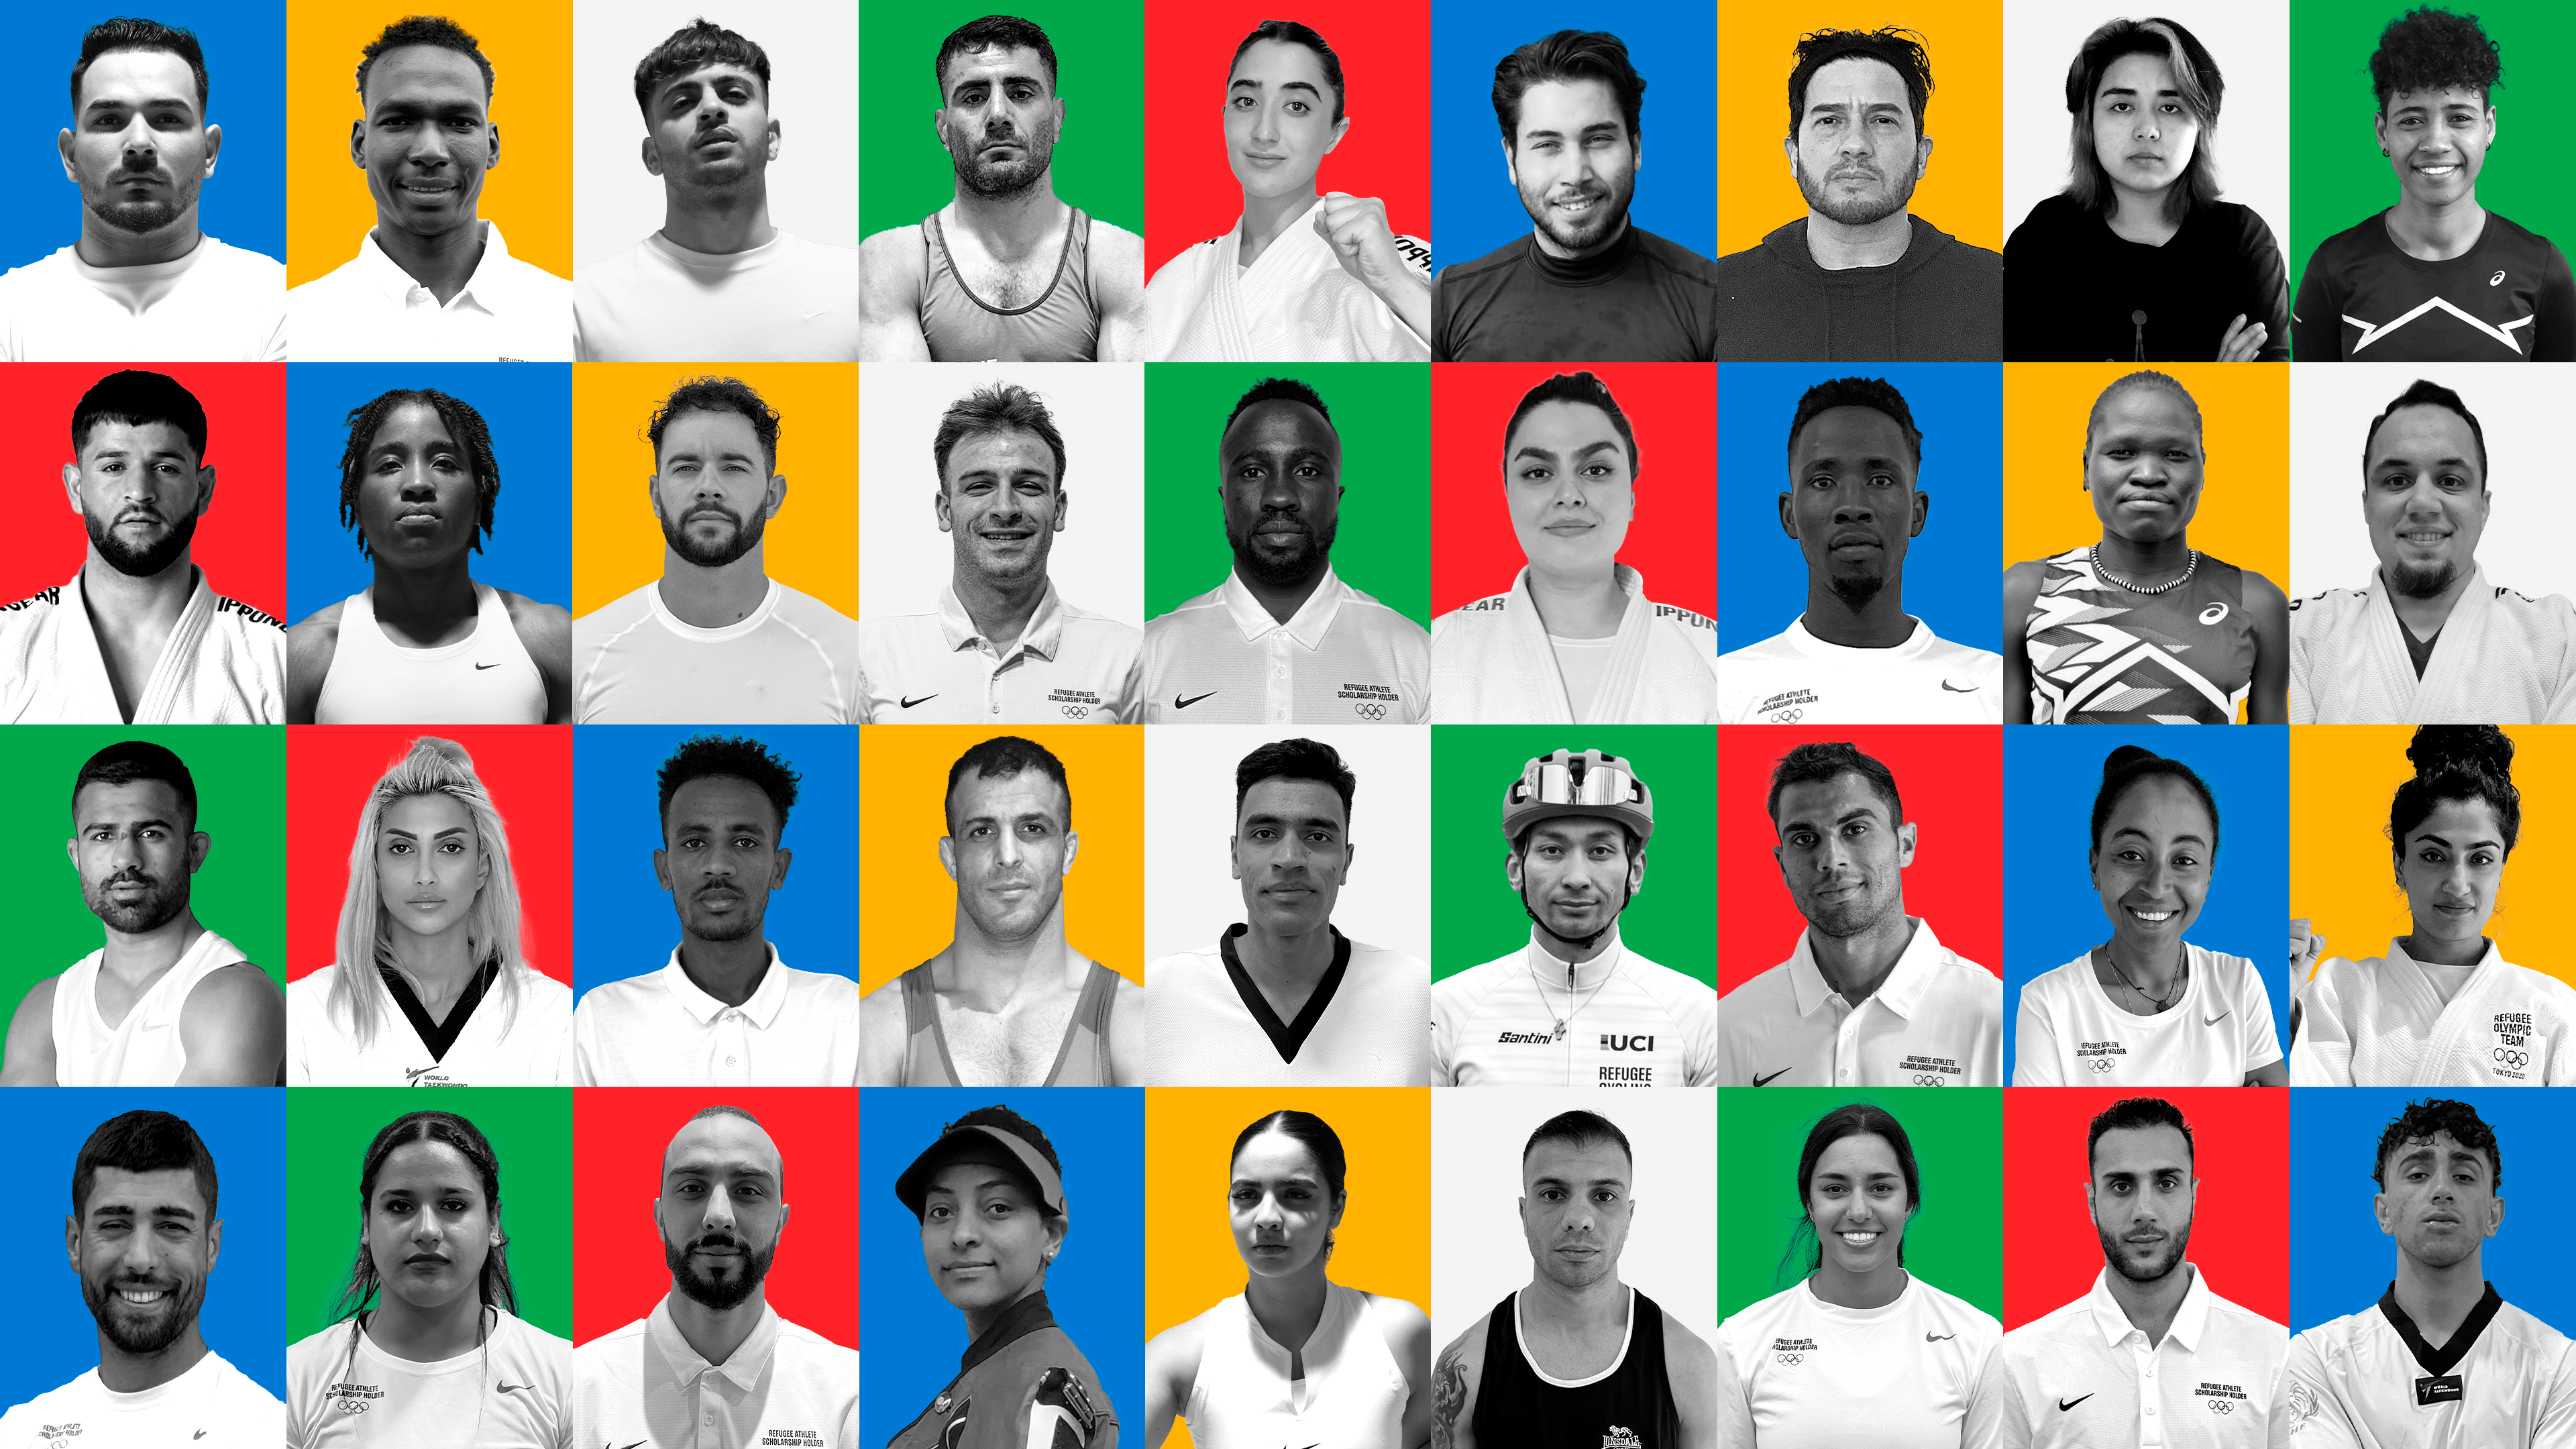 The Refugee Olympic Team for Paris 2024